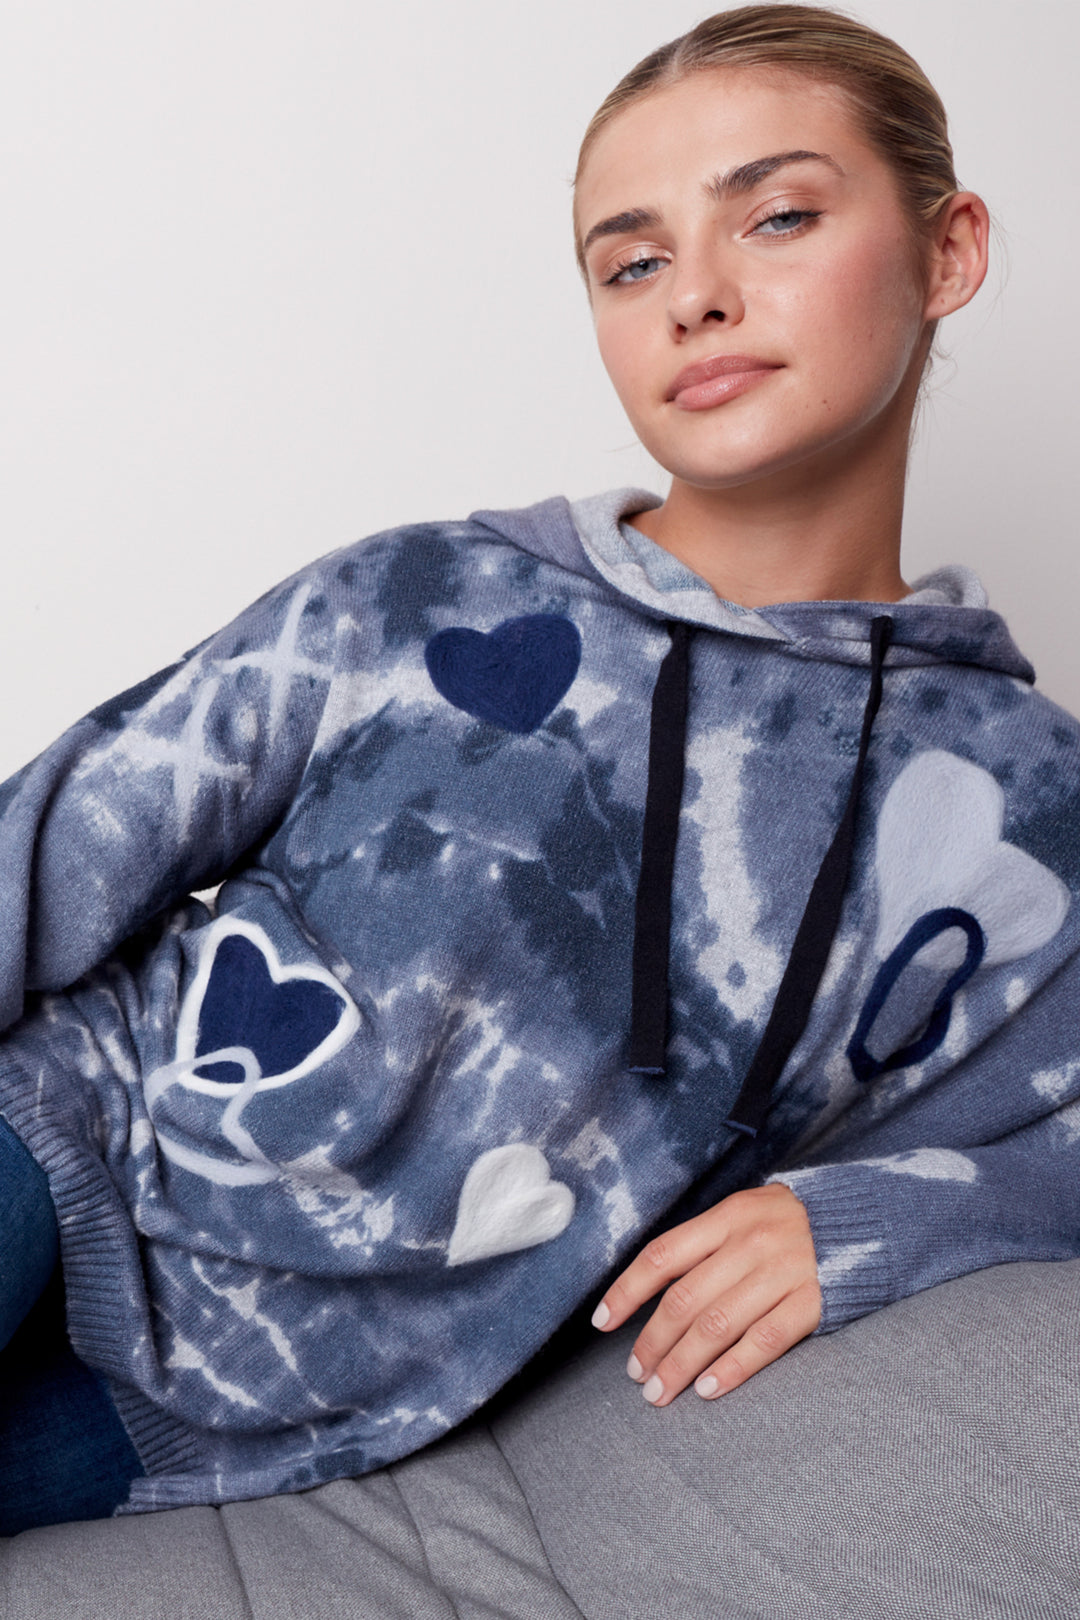 Feel the warmth and comfort of this Tiedye Hoodie Top with hearts. Its punch design graffiti and hearts print give it an eye-catching look.